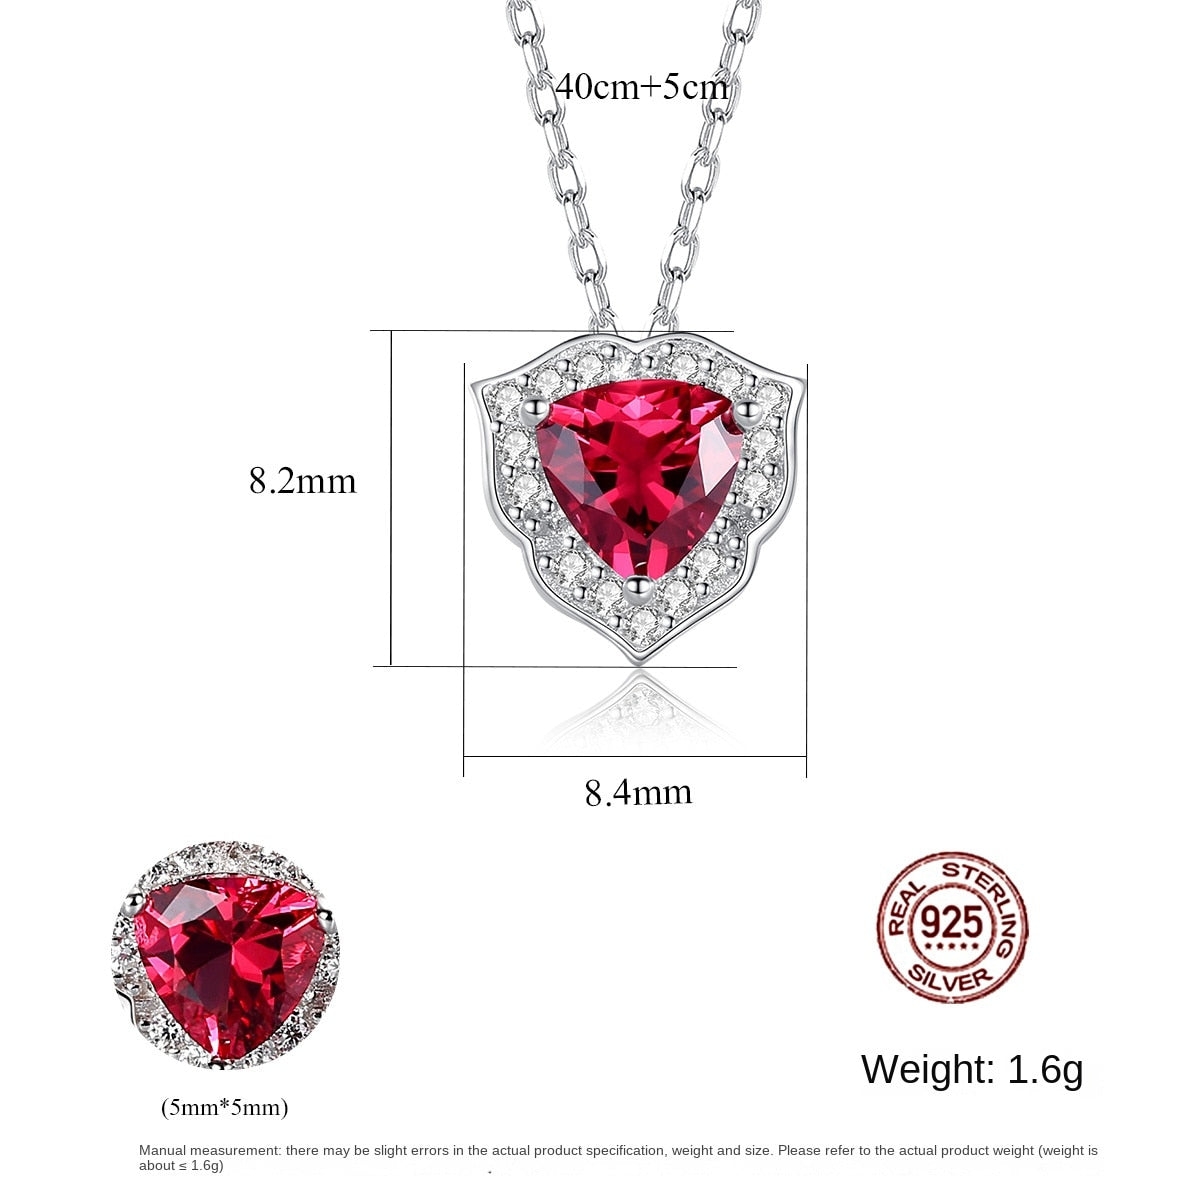 Gemstonely-S925 Silver Lock Necklace with Triangular Simulate Ruby Gemstone Pendant for Women